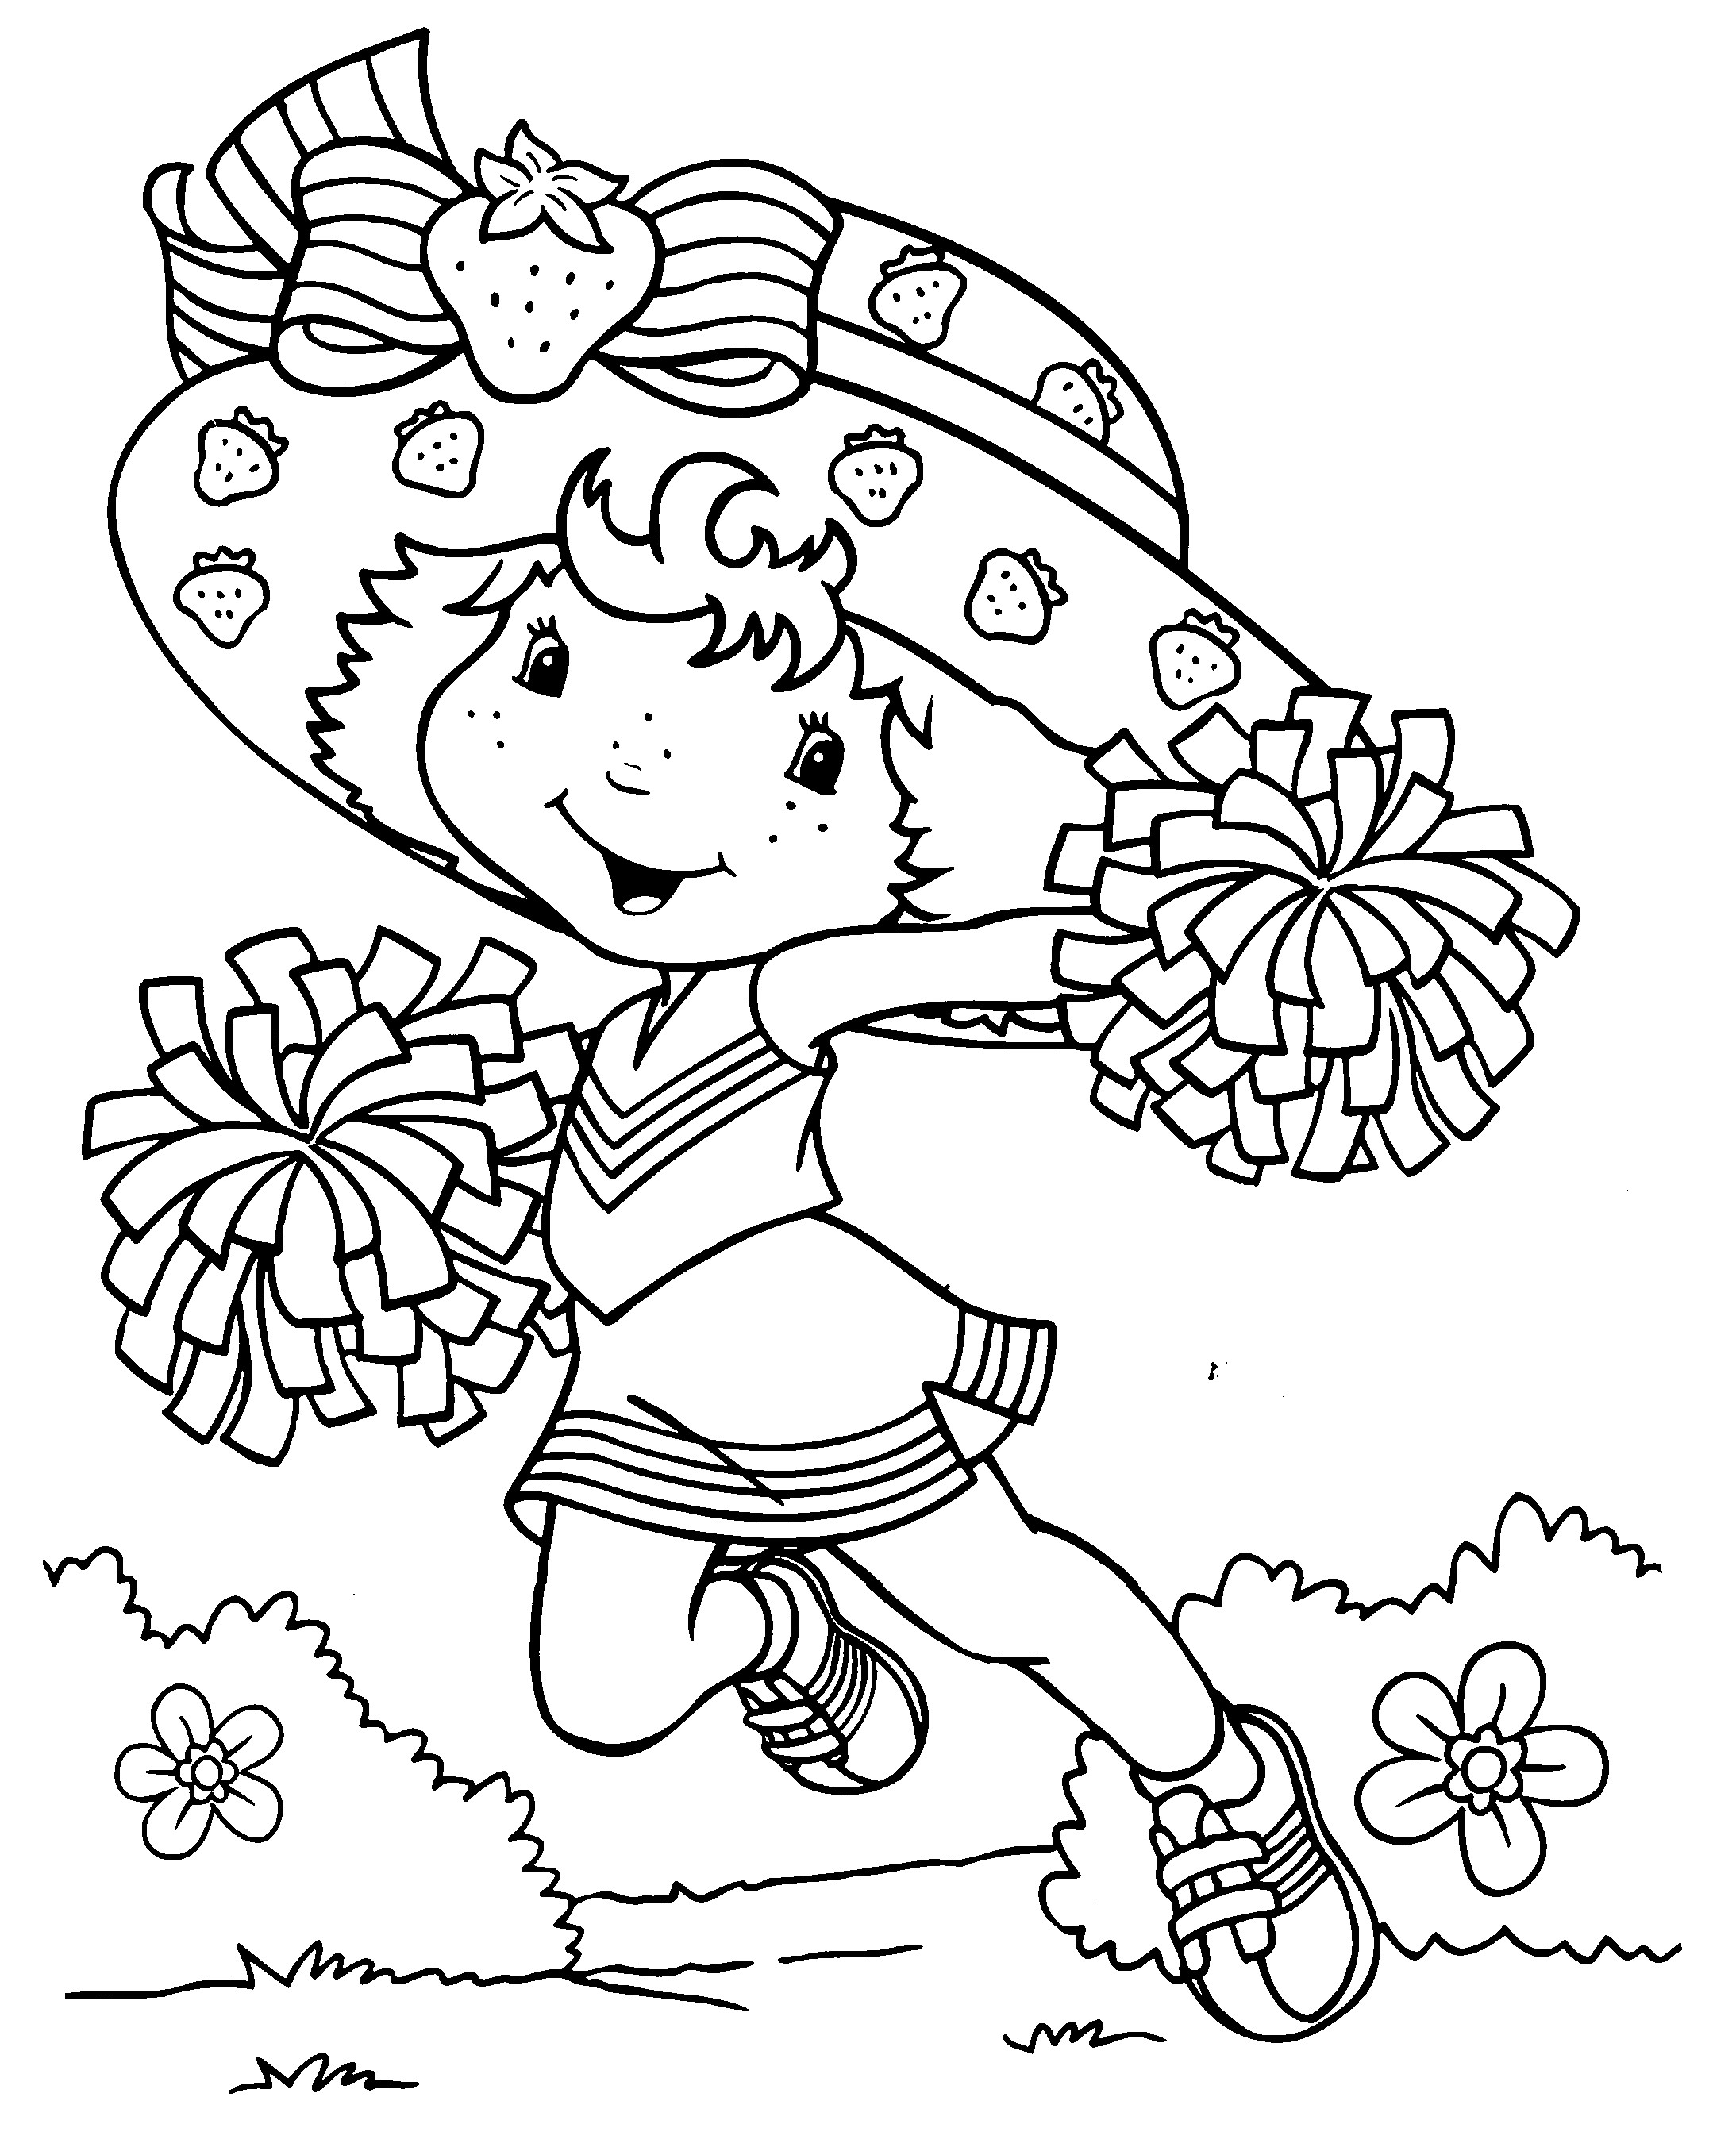 Coloring Sheets For Girls Strawberry Shortcake
 Free Printable Strawberry Shortcake Coloring Pages For Kids